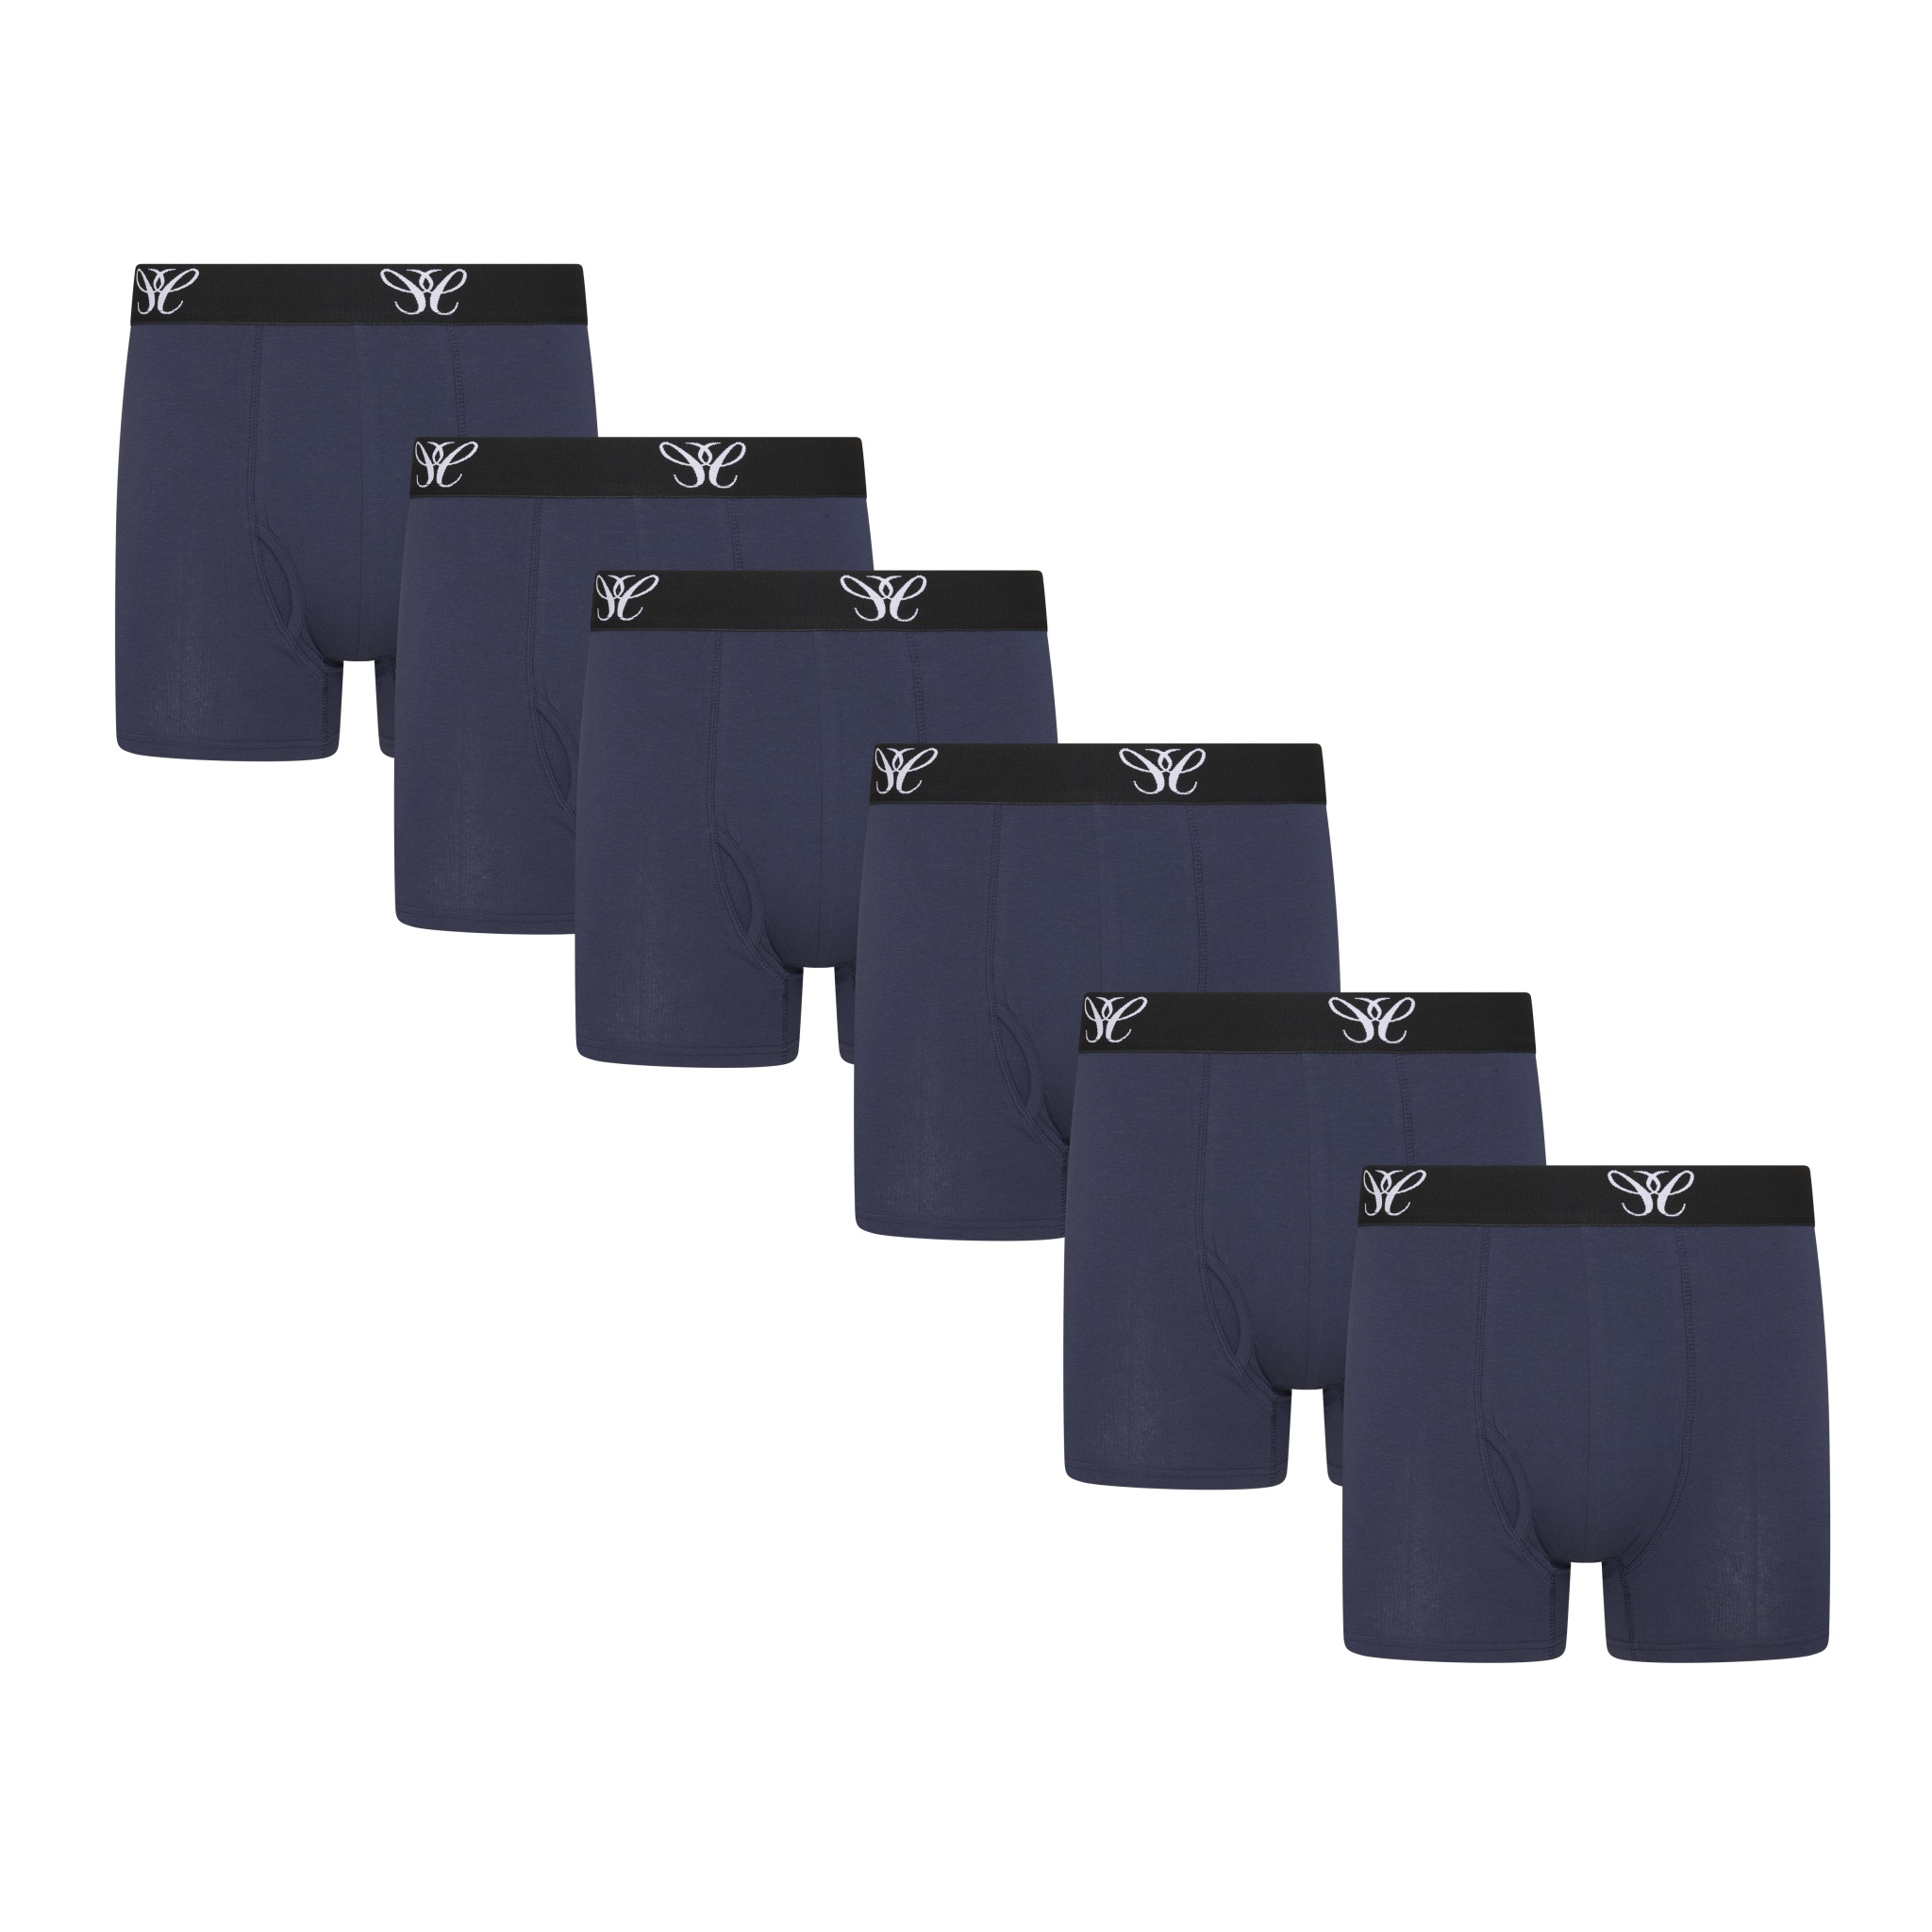 6-Pack Boxers